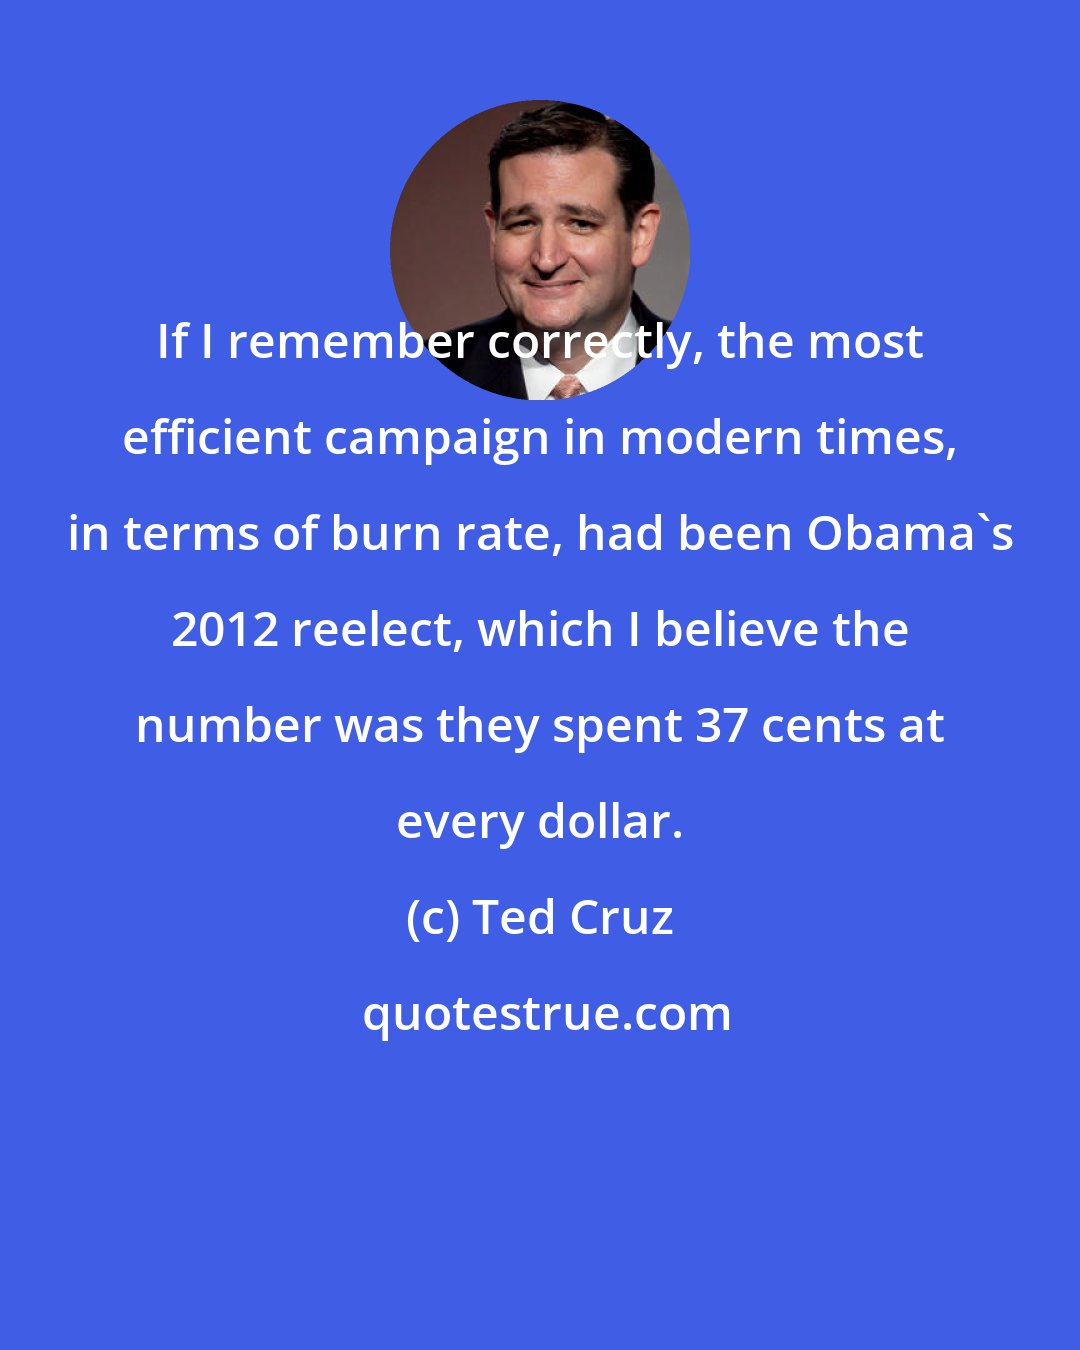 Ted Cruz: If I remember correctly, the most efficient campaign in modern times, in terms of burn rate, had been Obama's 2012 reelect, which I believe the number was they spent 37 cents at every dollar.